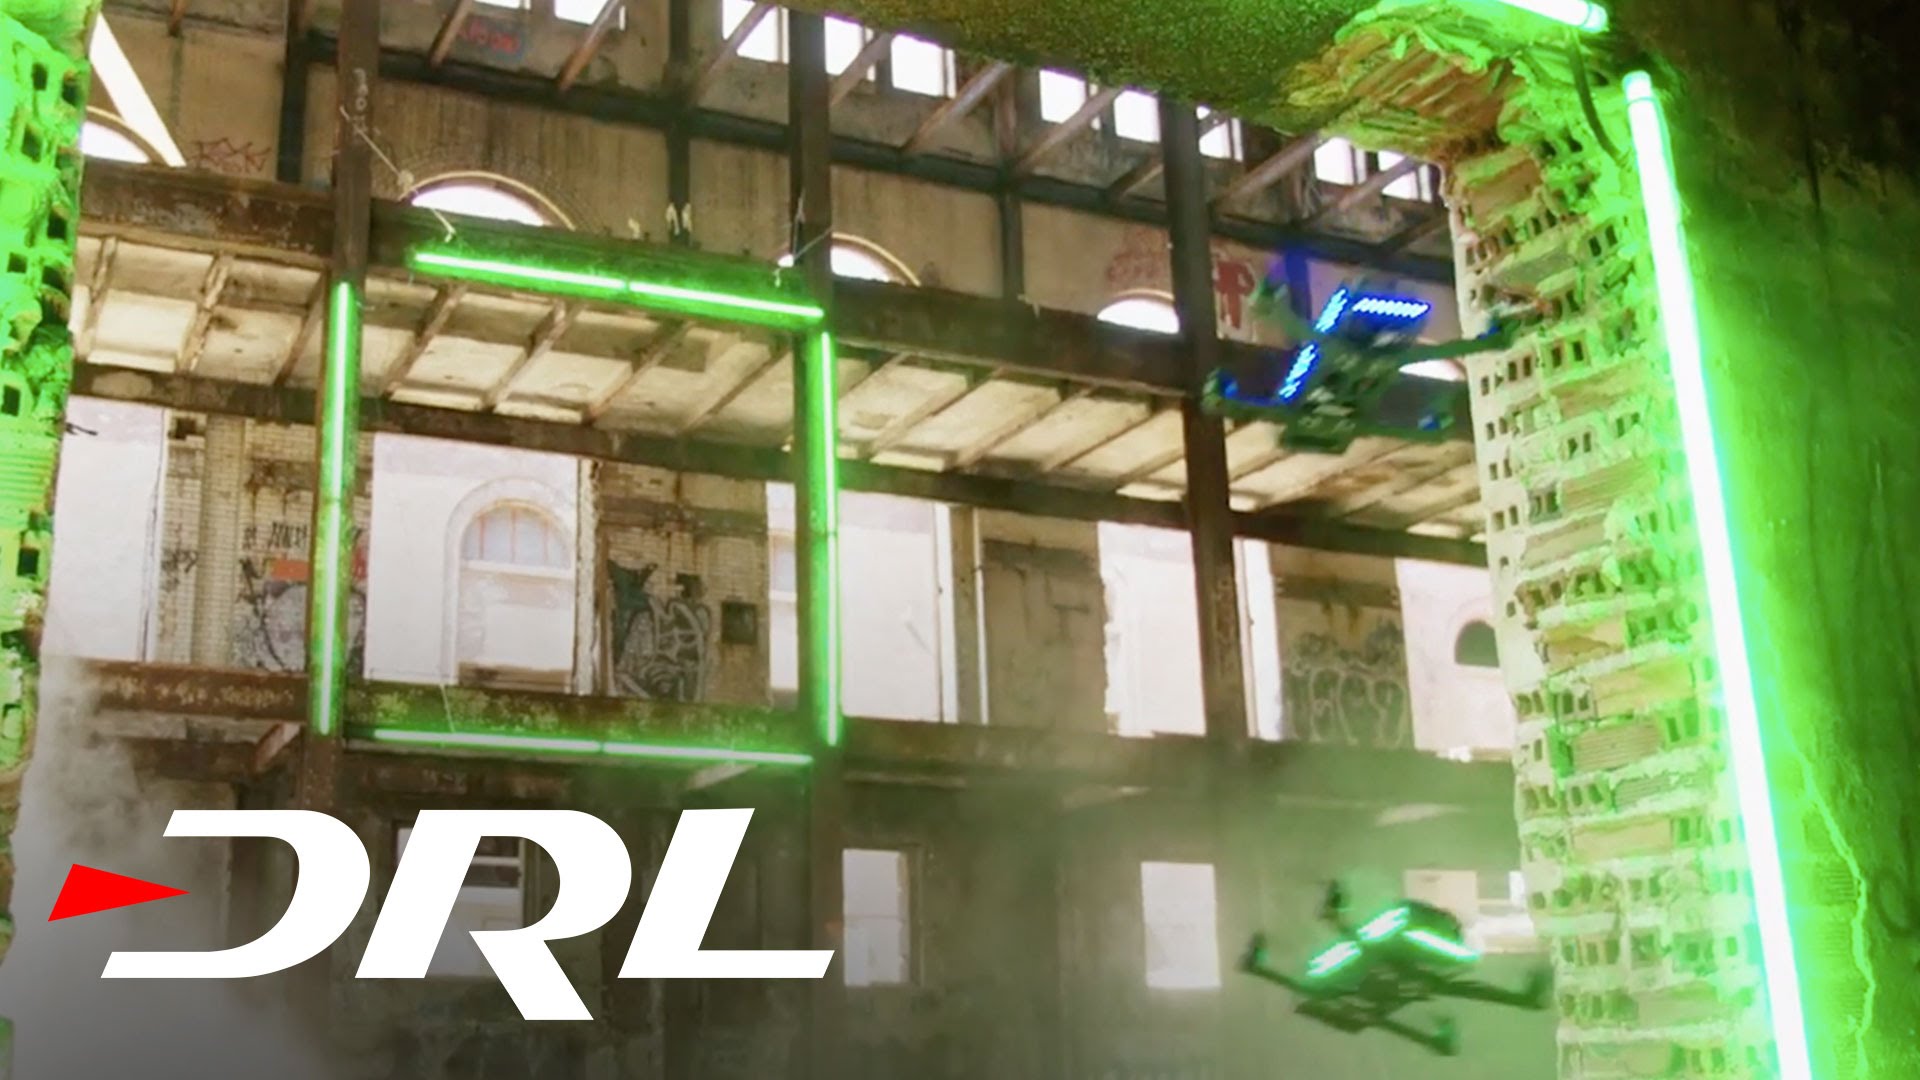 Drone Racing League: Gates of Hell Course Overview | DRL